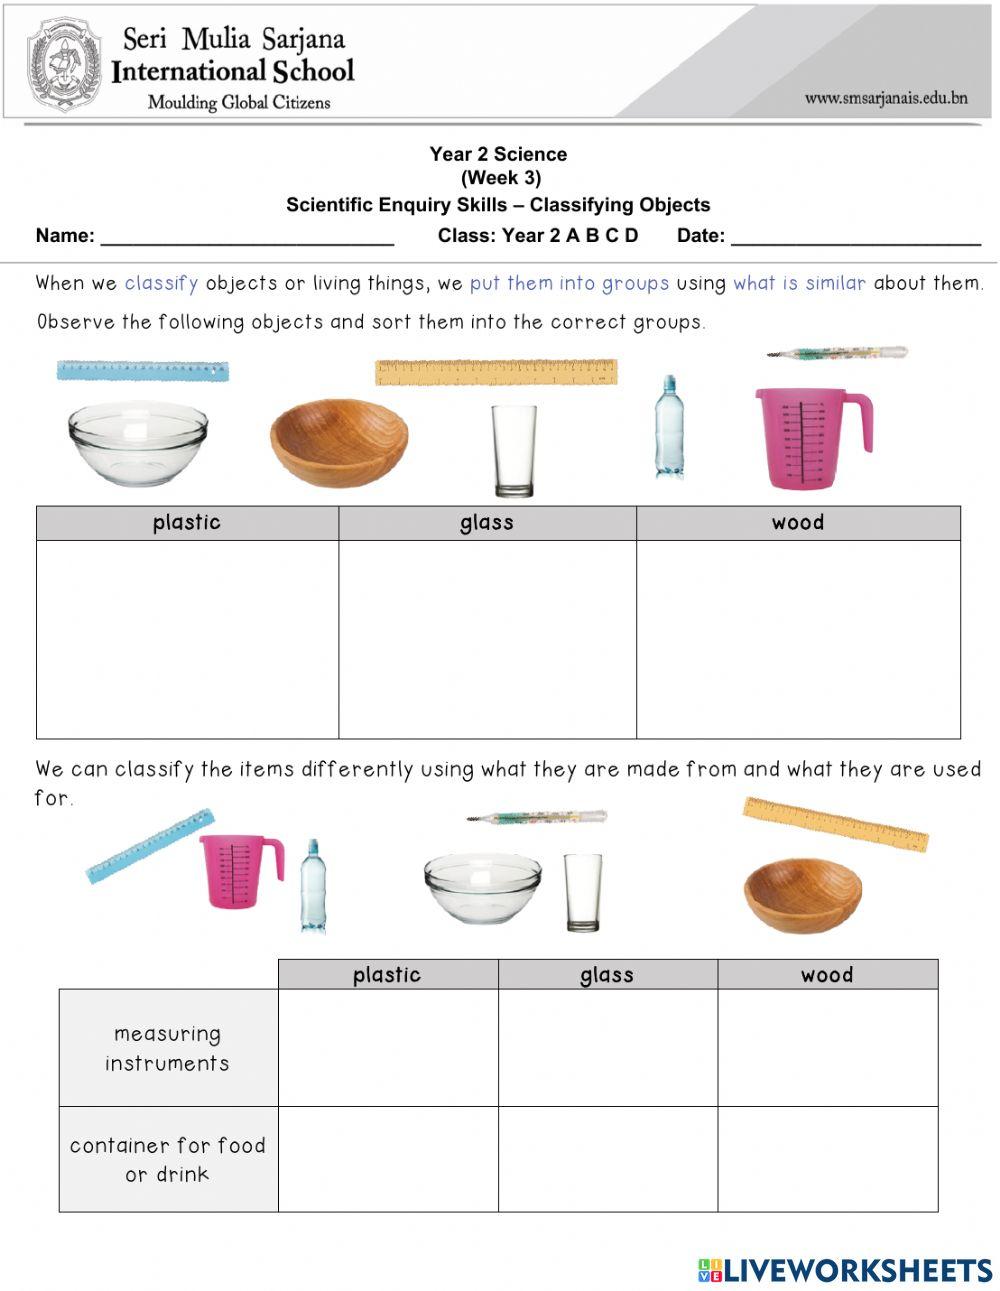 Scientific Enquiry Skills: Classifying objects